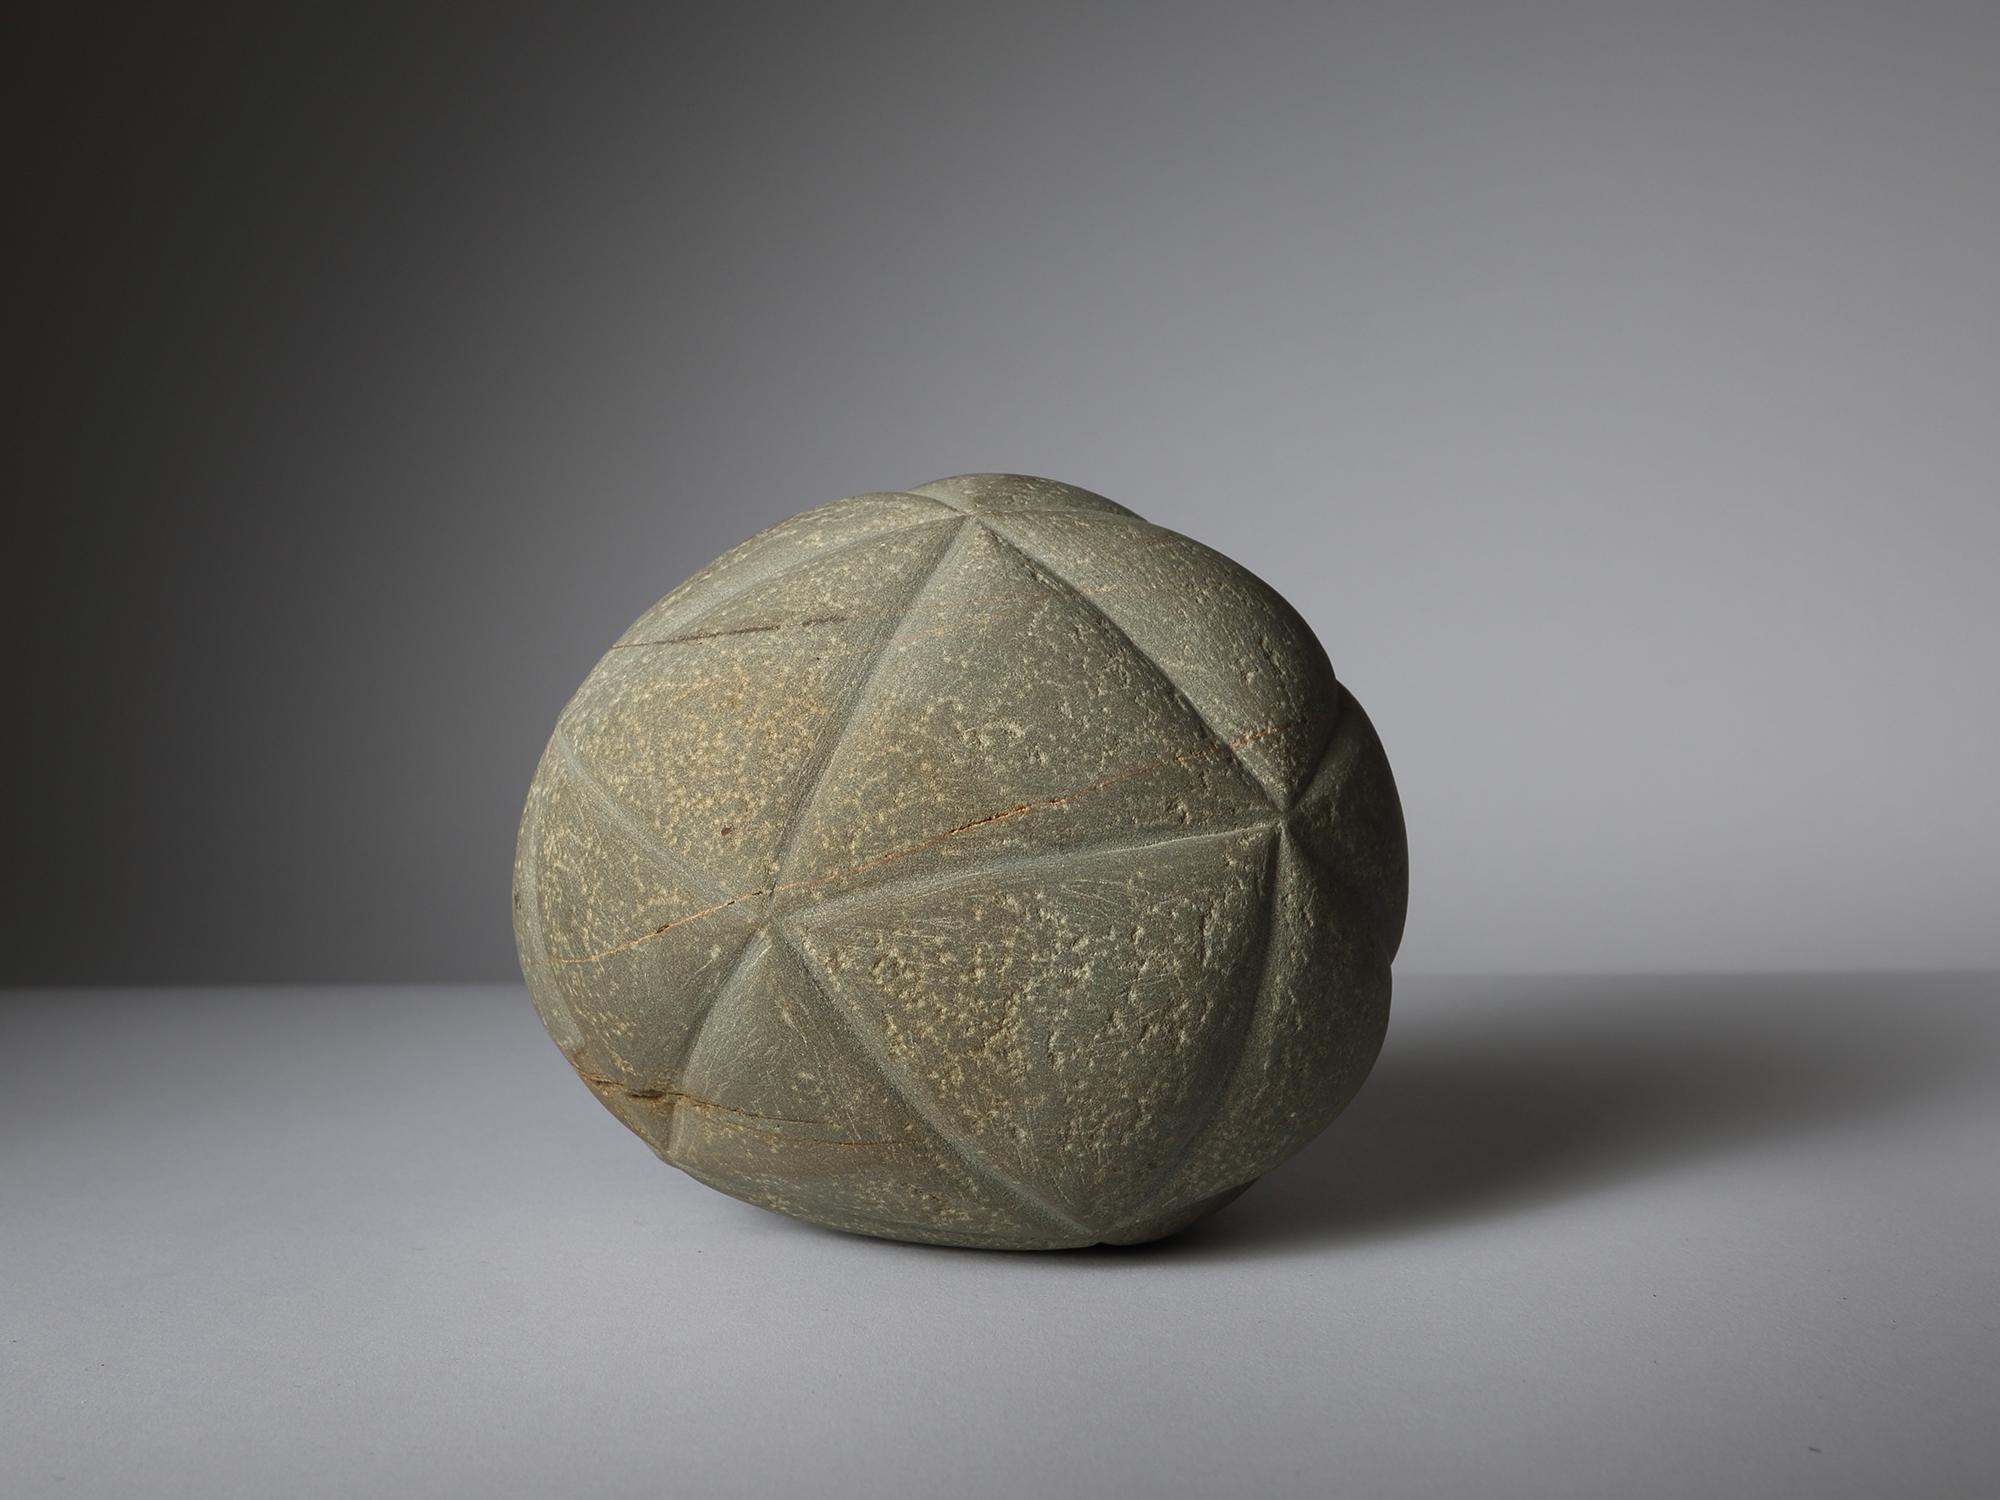 Peter Randall-Page Abstract Sculpture - Stone Maquette I